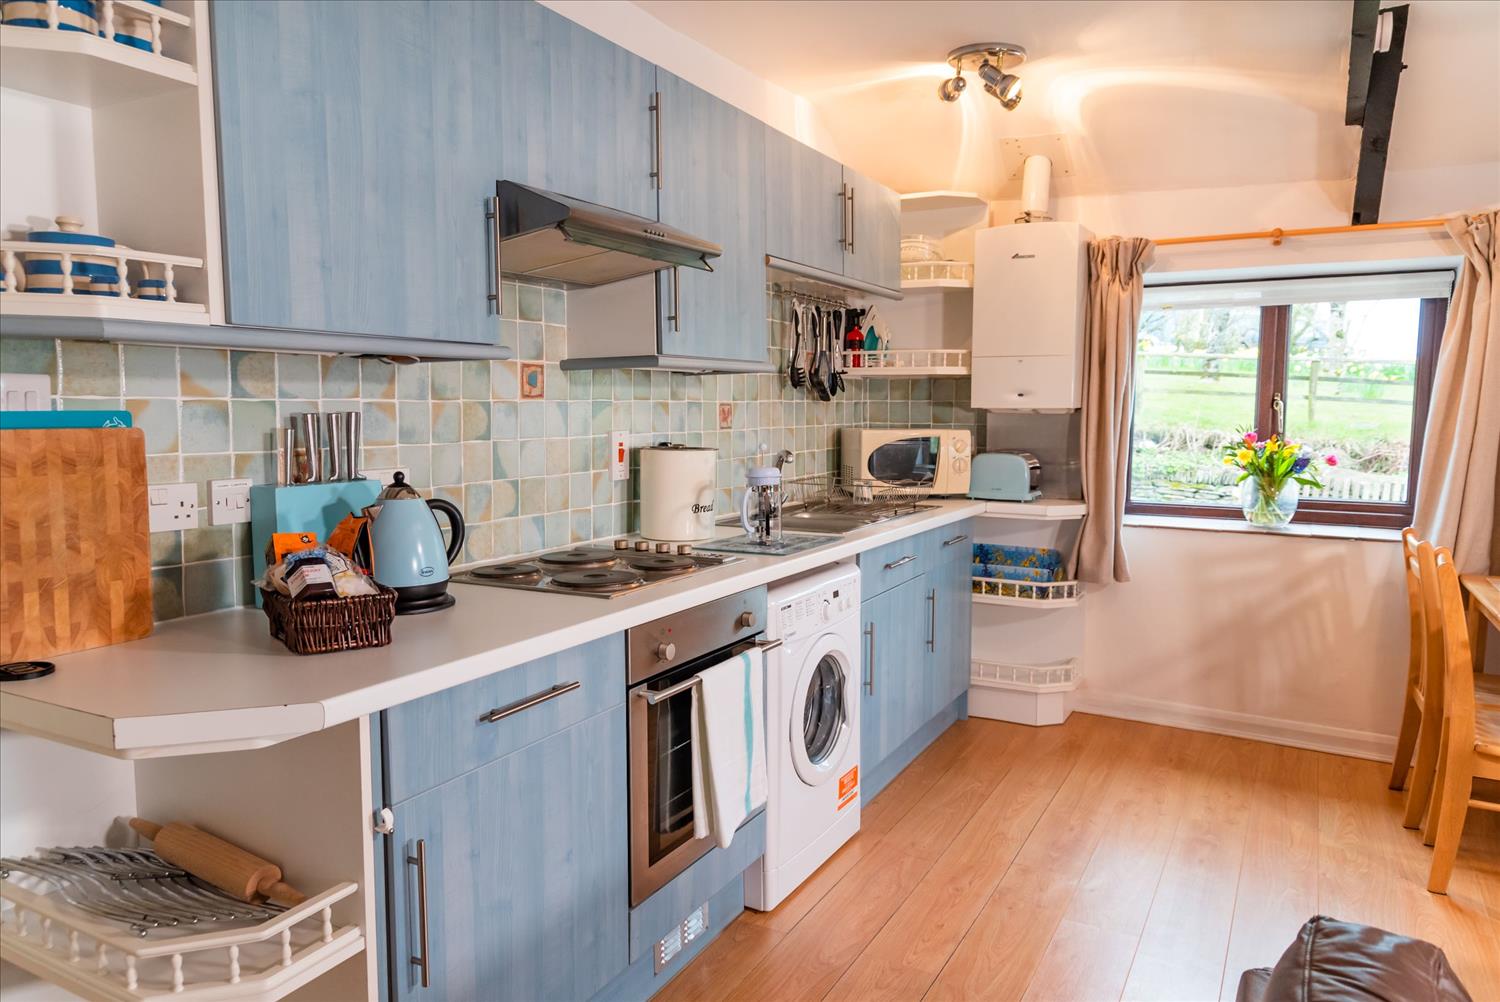 Elderberry Cottage's sea-blue kitchen, with a welcome pack containing Cornish goodies on the worktop and a variety of kitchen spoons and other stuff that I wouldn't know what to do with hanging from hooks on the wall., 